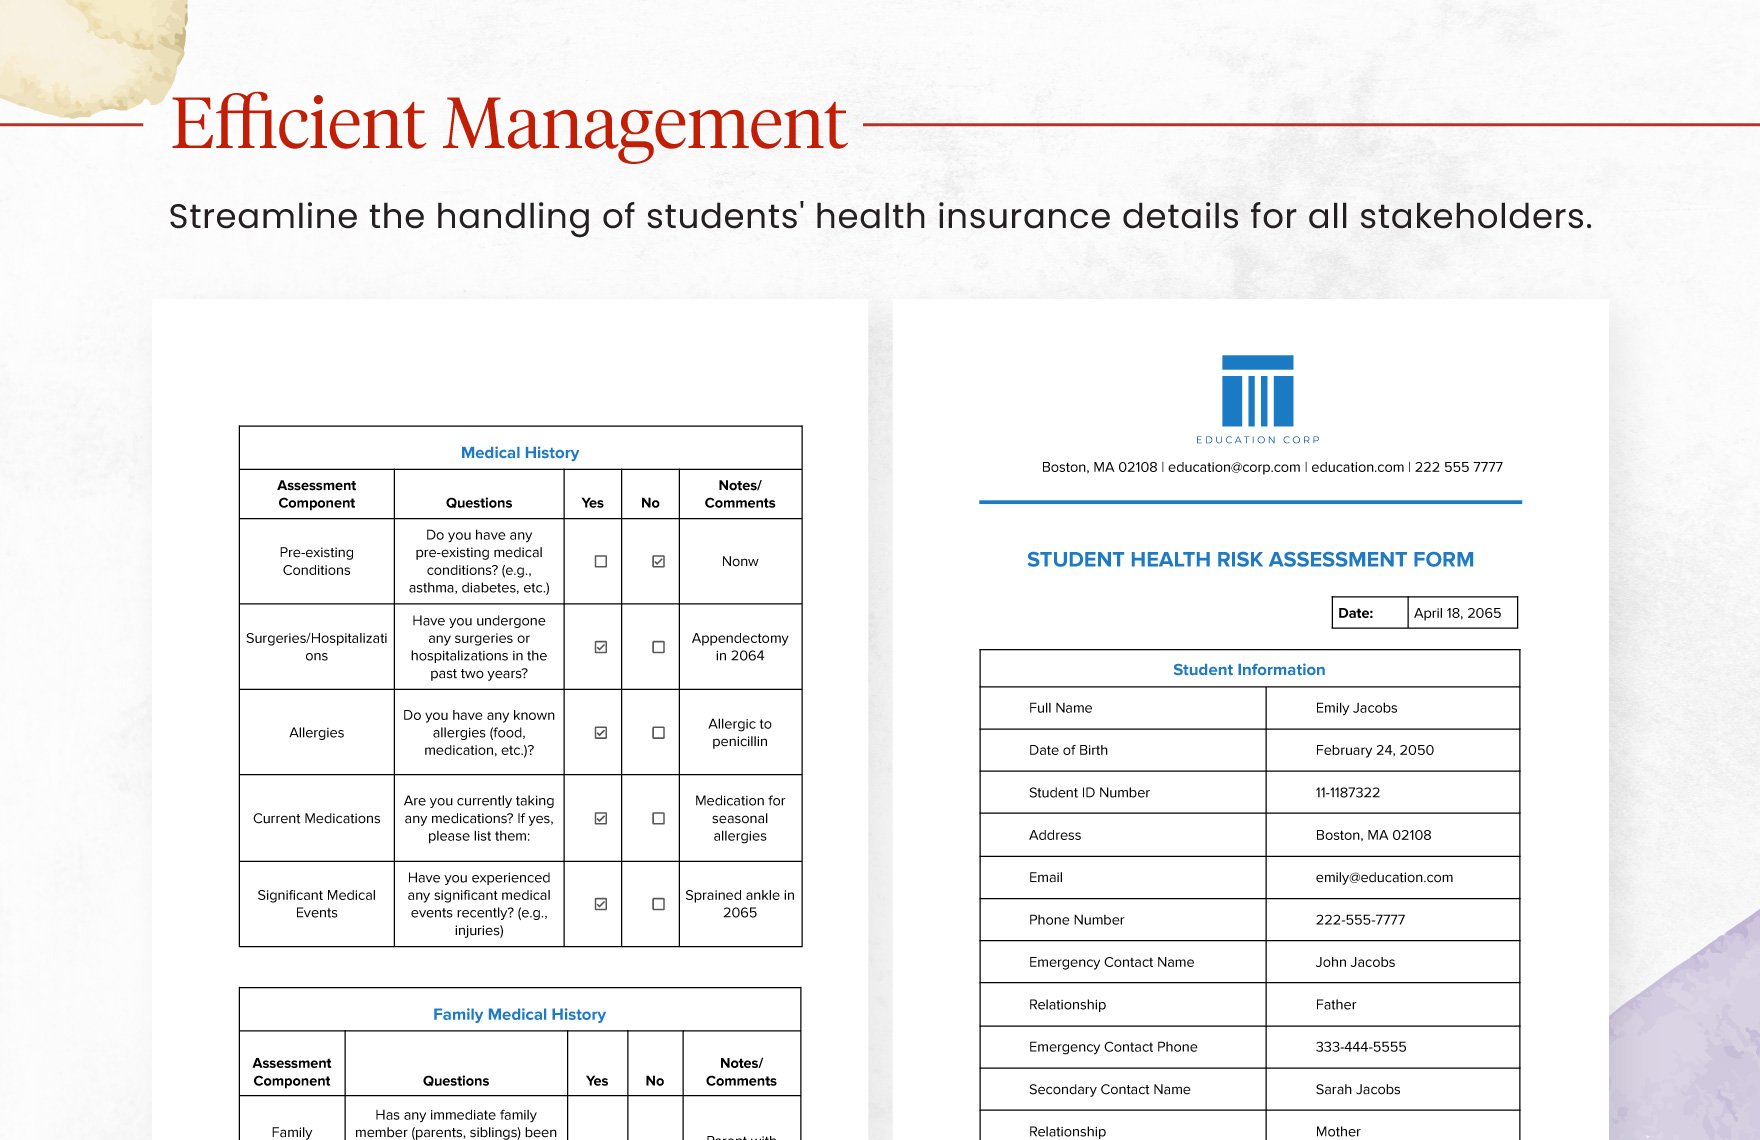 Student Health Risk Assessment Form Template